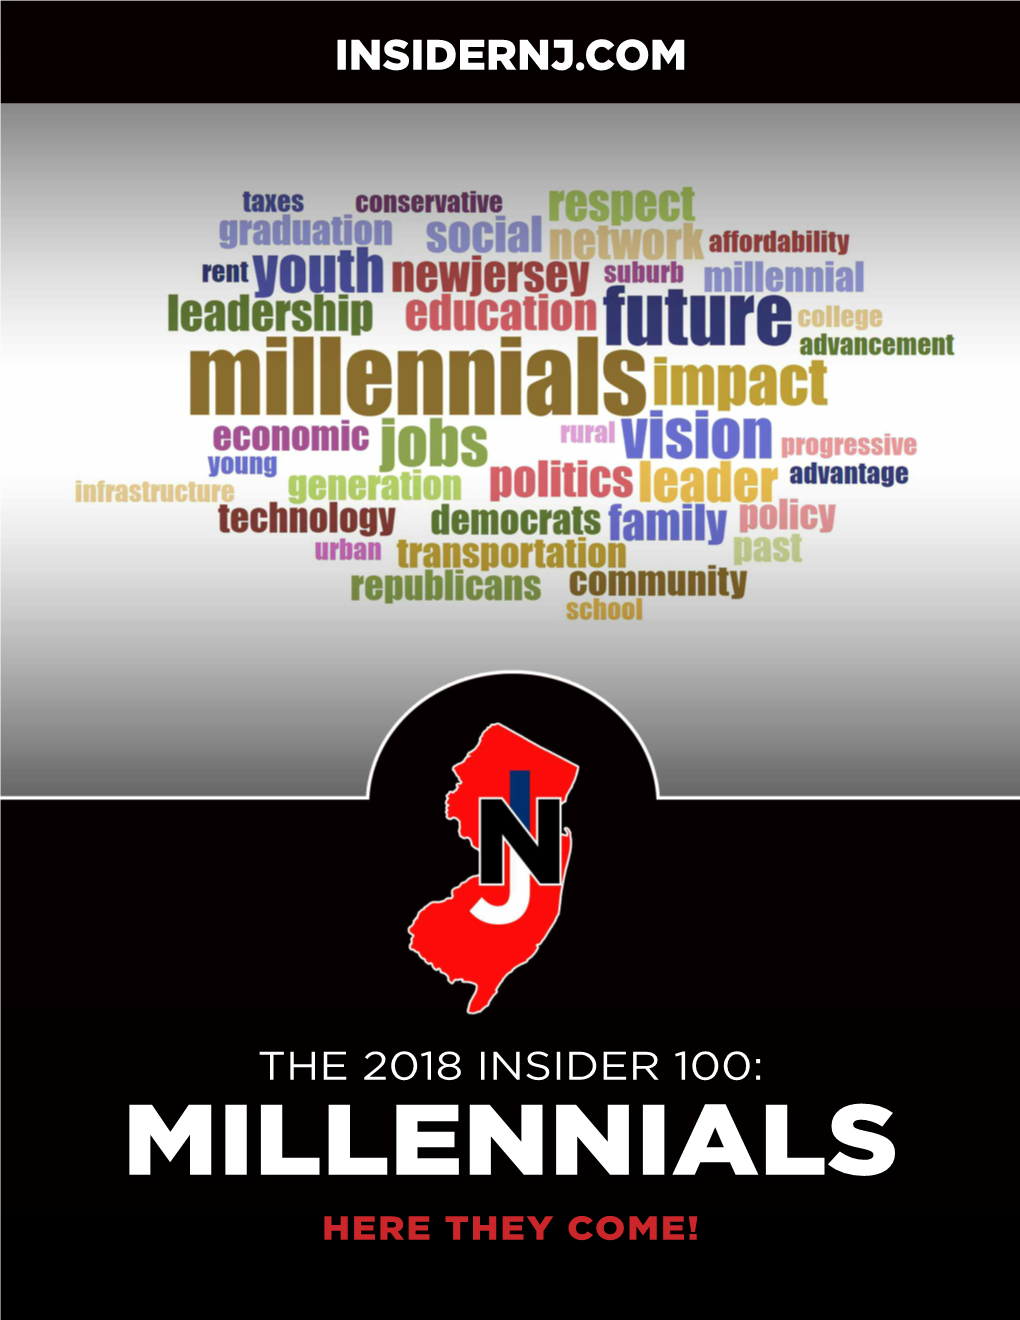 MILLENNIALS HERE THEY COME! Message from the Editor 2018 MILLENNIALS